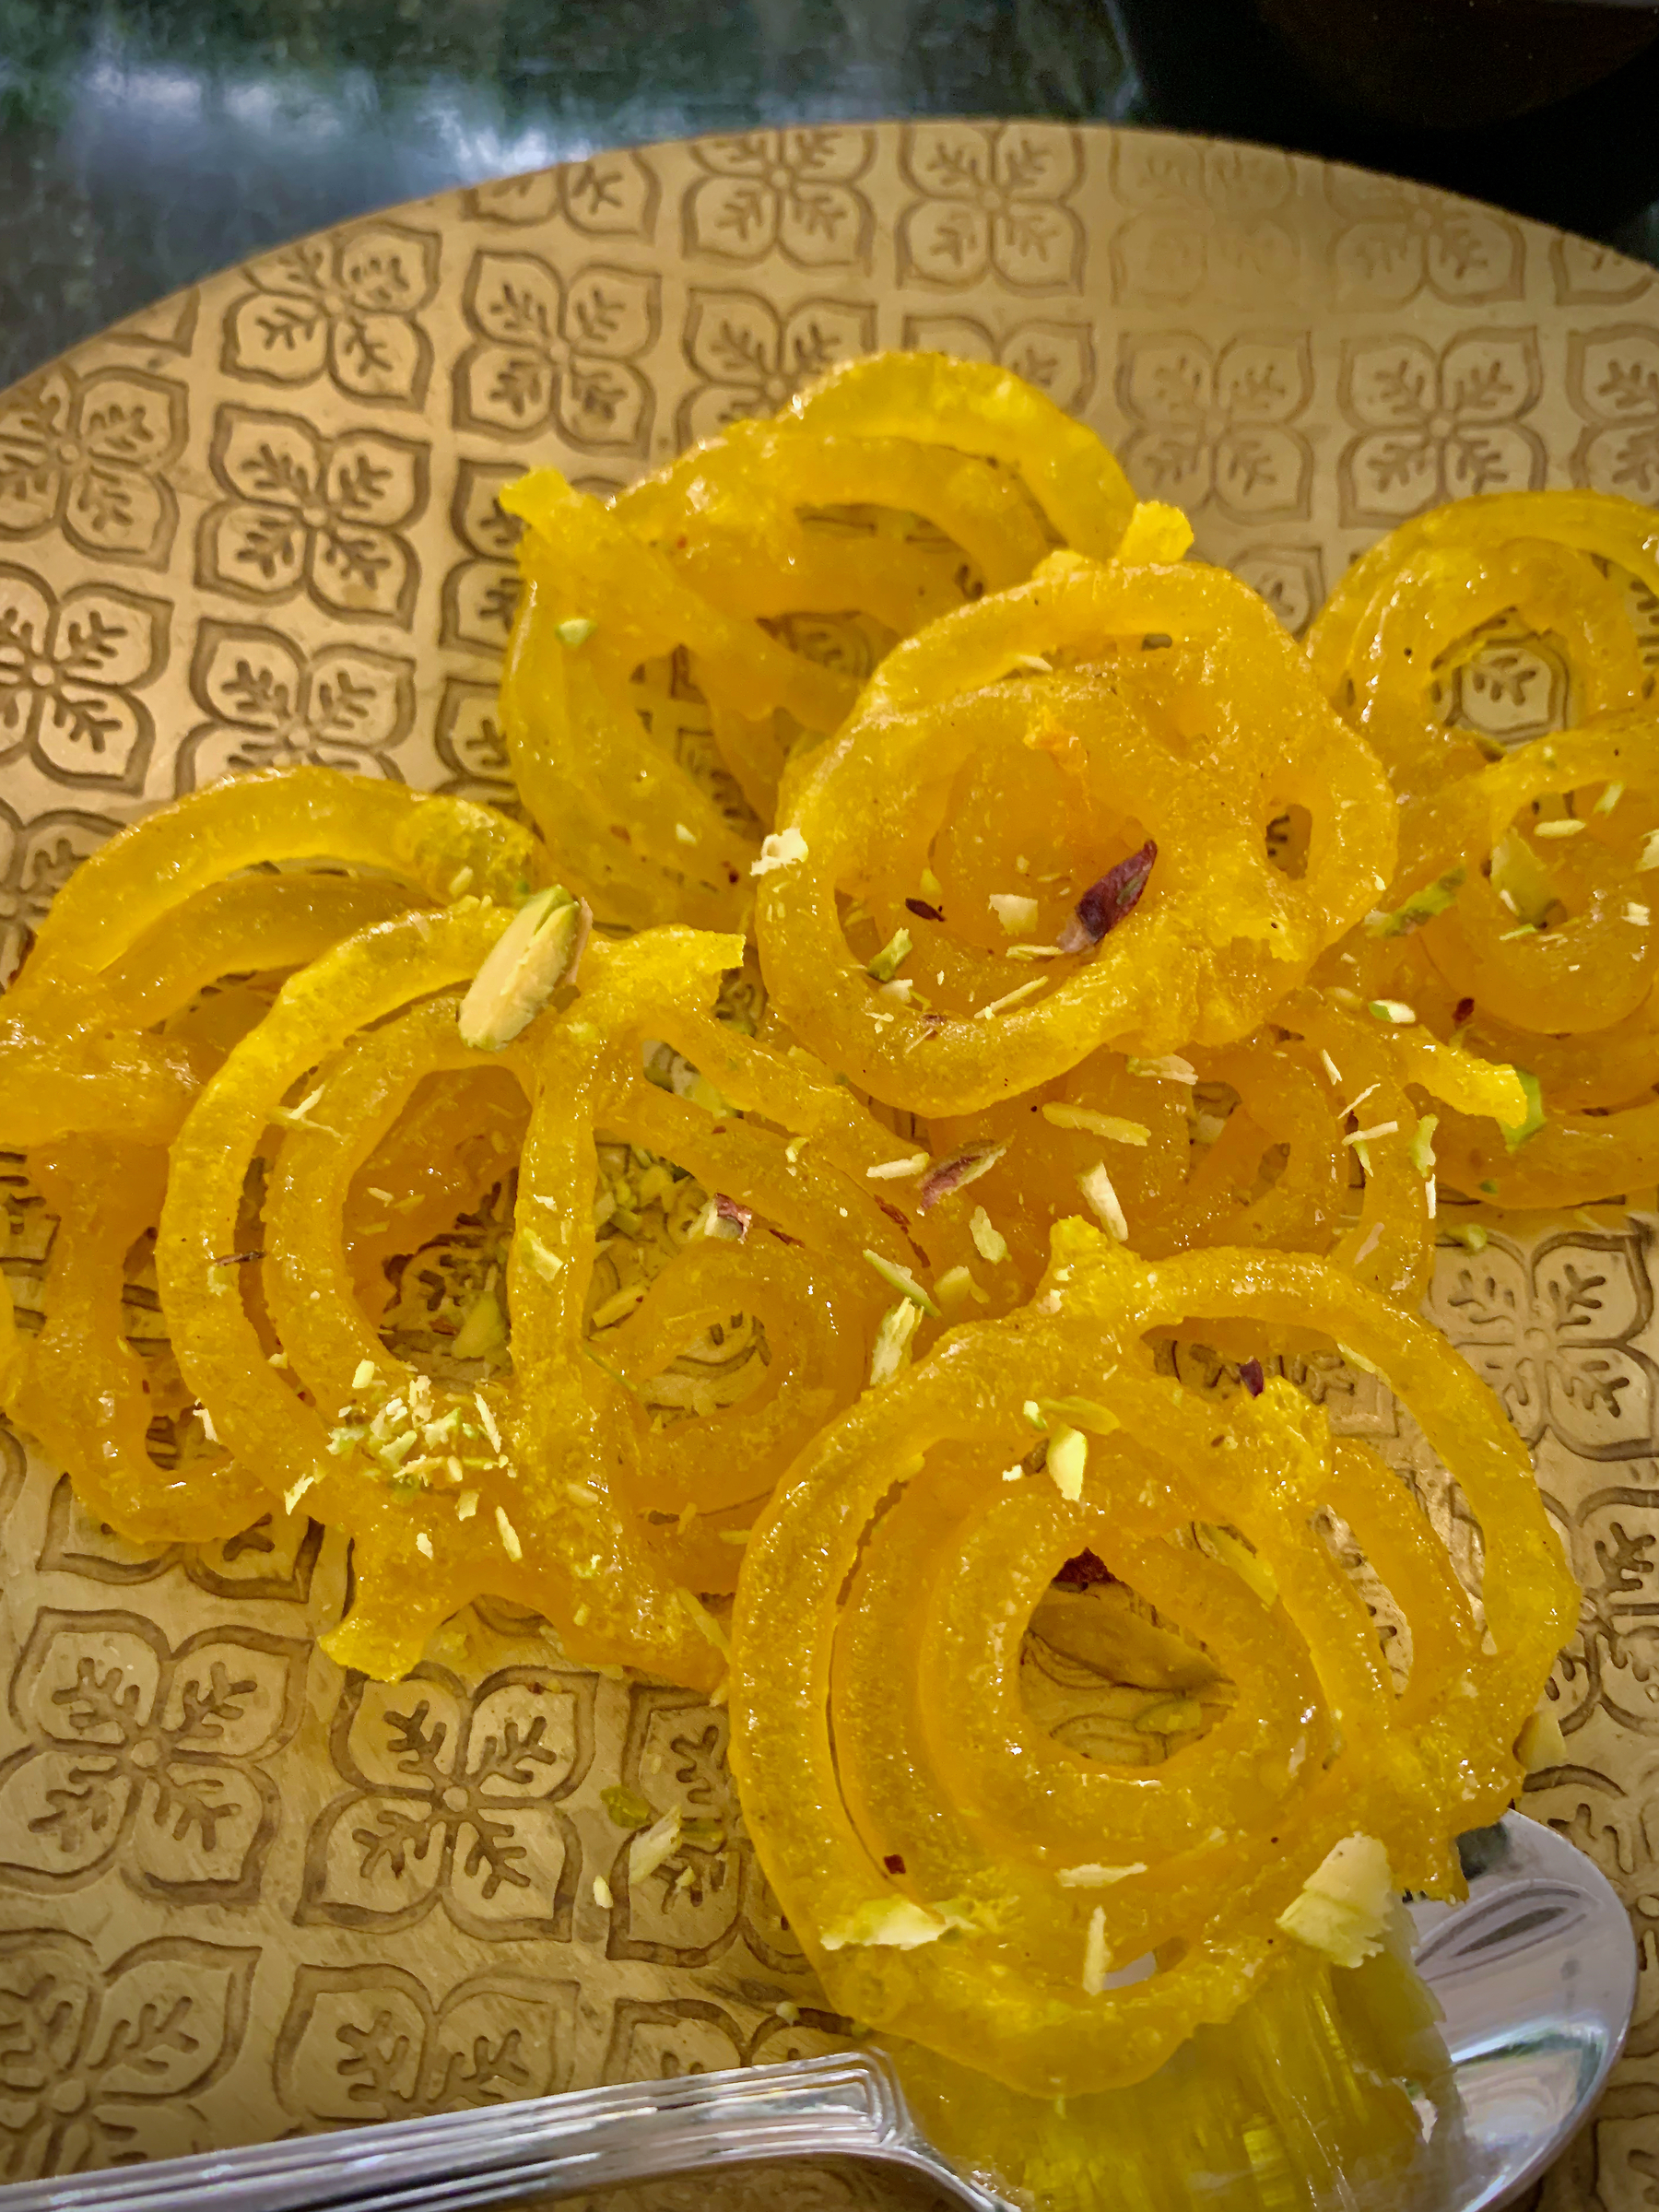 A plate of jalebis in chrome yellow colour